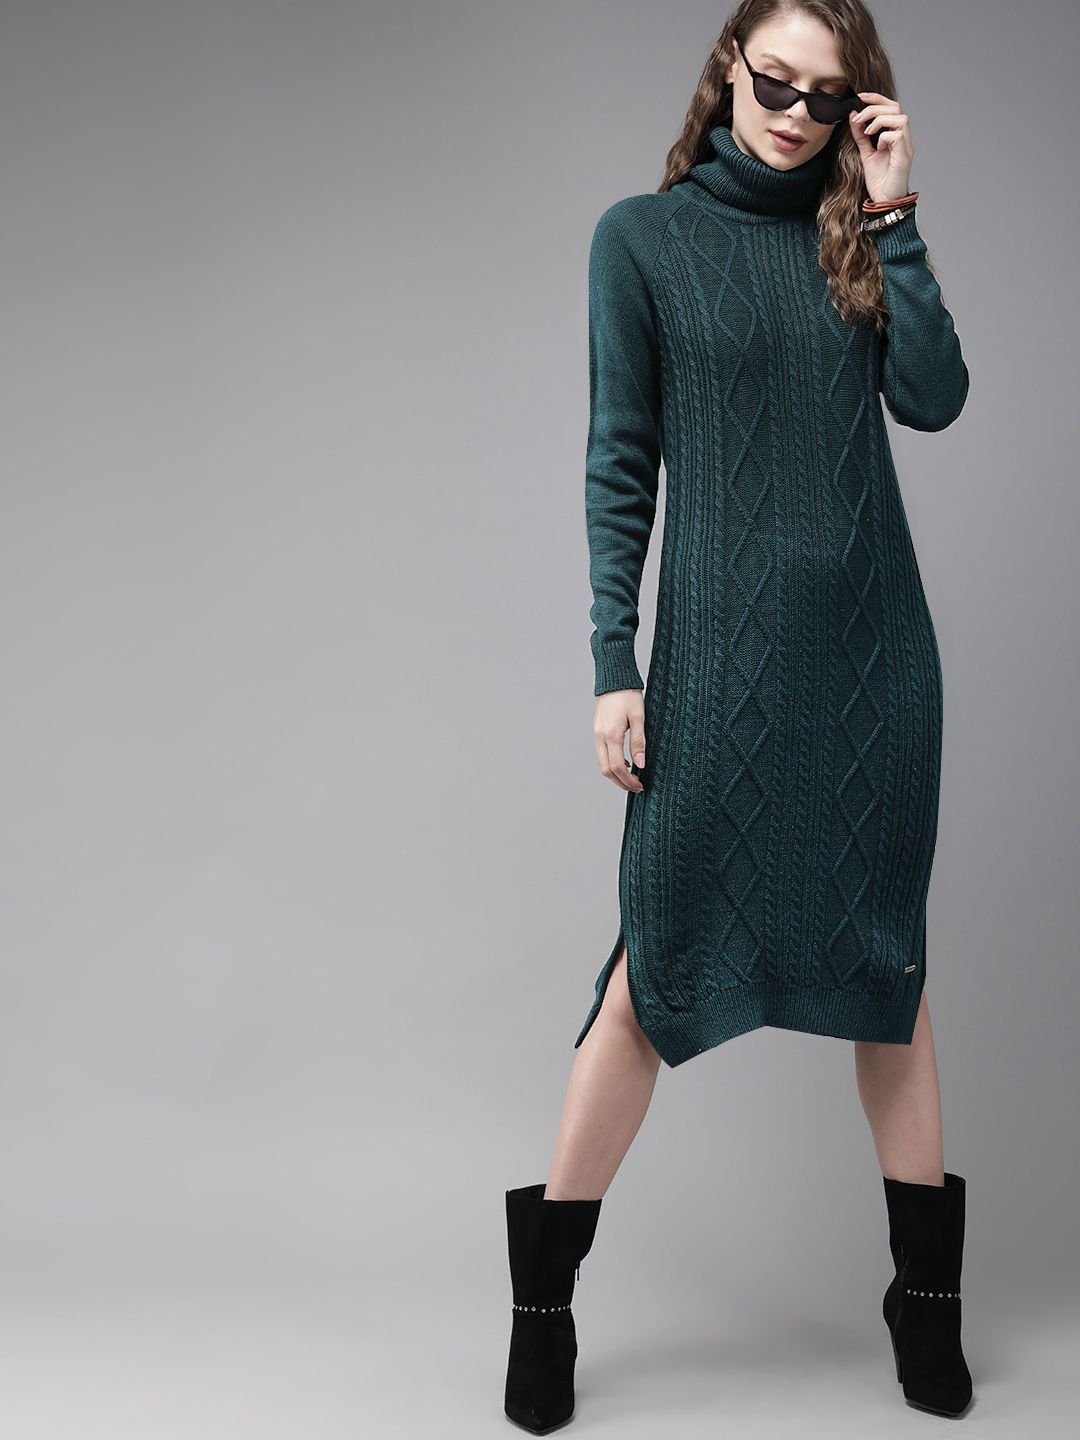 The Roadster Lifestyle Co Women Self Design Teal Green Sweater Dress Price in India